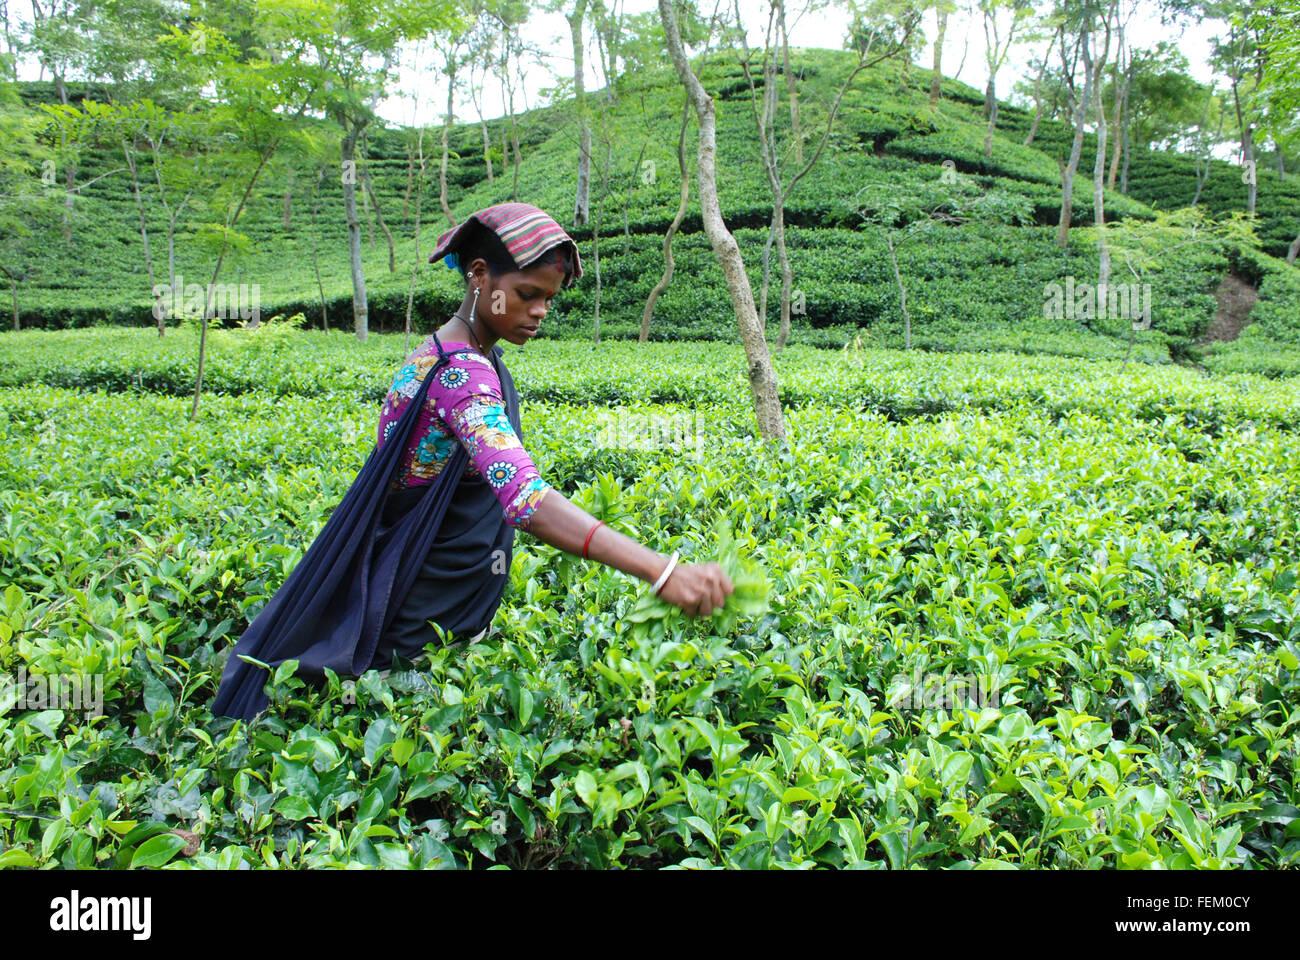 Women workers collecting tea leaves from the garden during plucking season in Srimangal, Bangladesh. Stock Photo